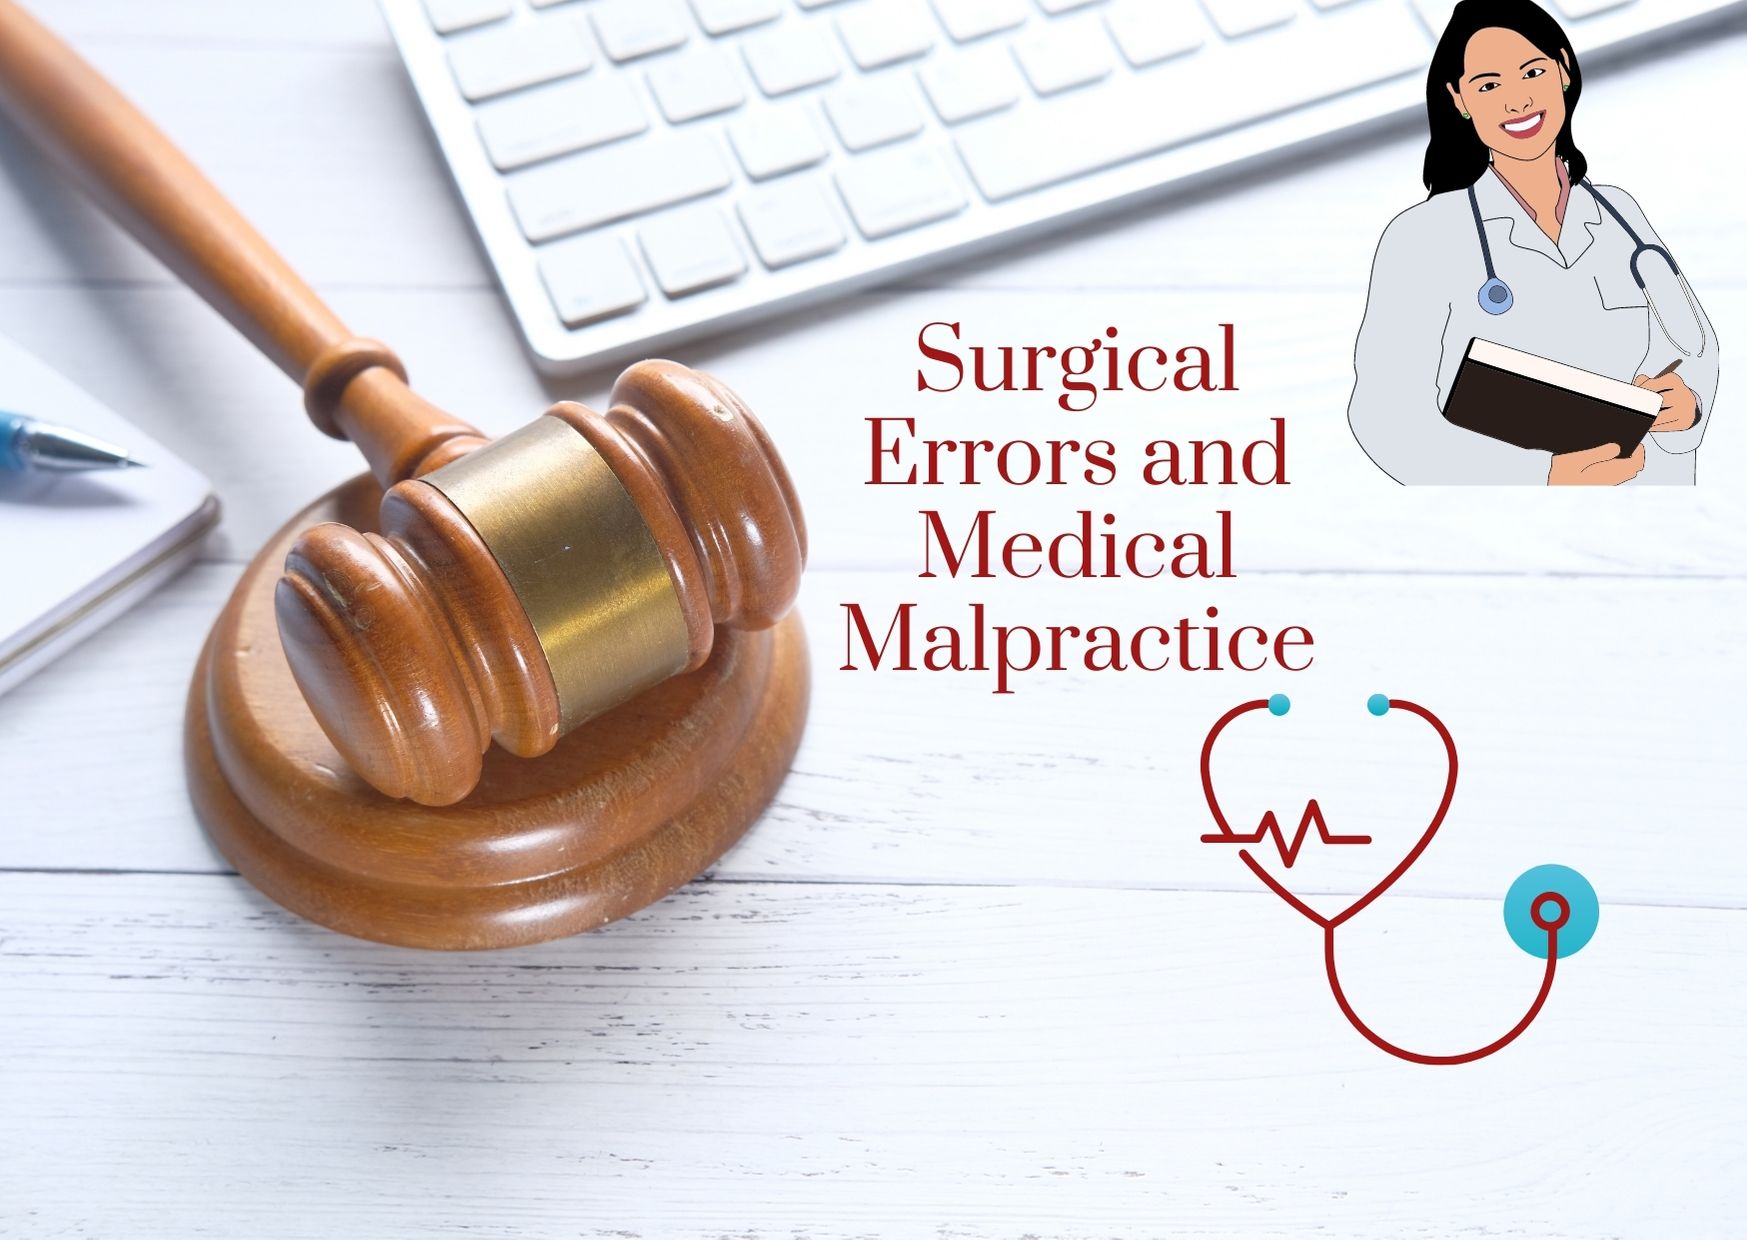 Common causes of Surgical Errors in the Operating Room